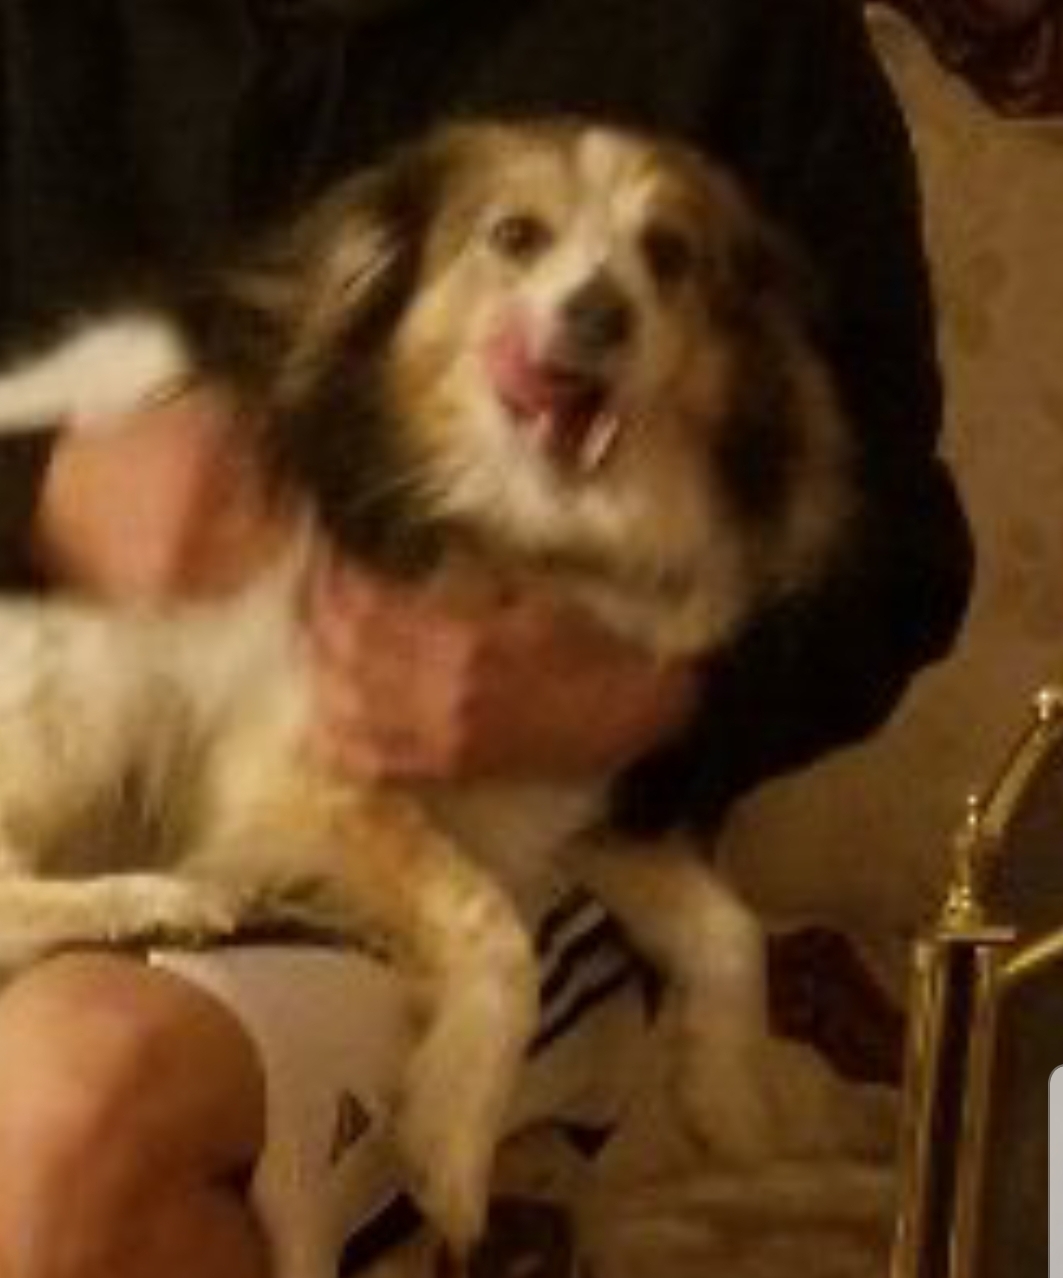 Image of Gus, Lost Dog